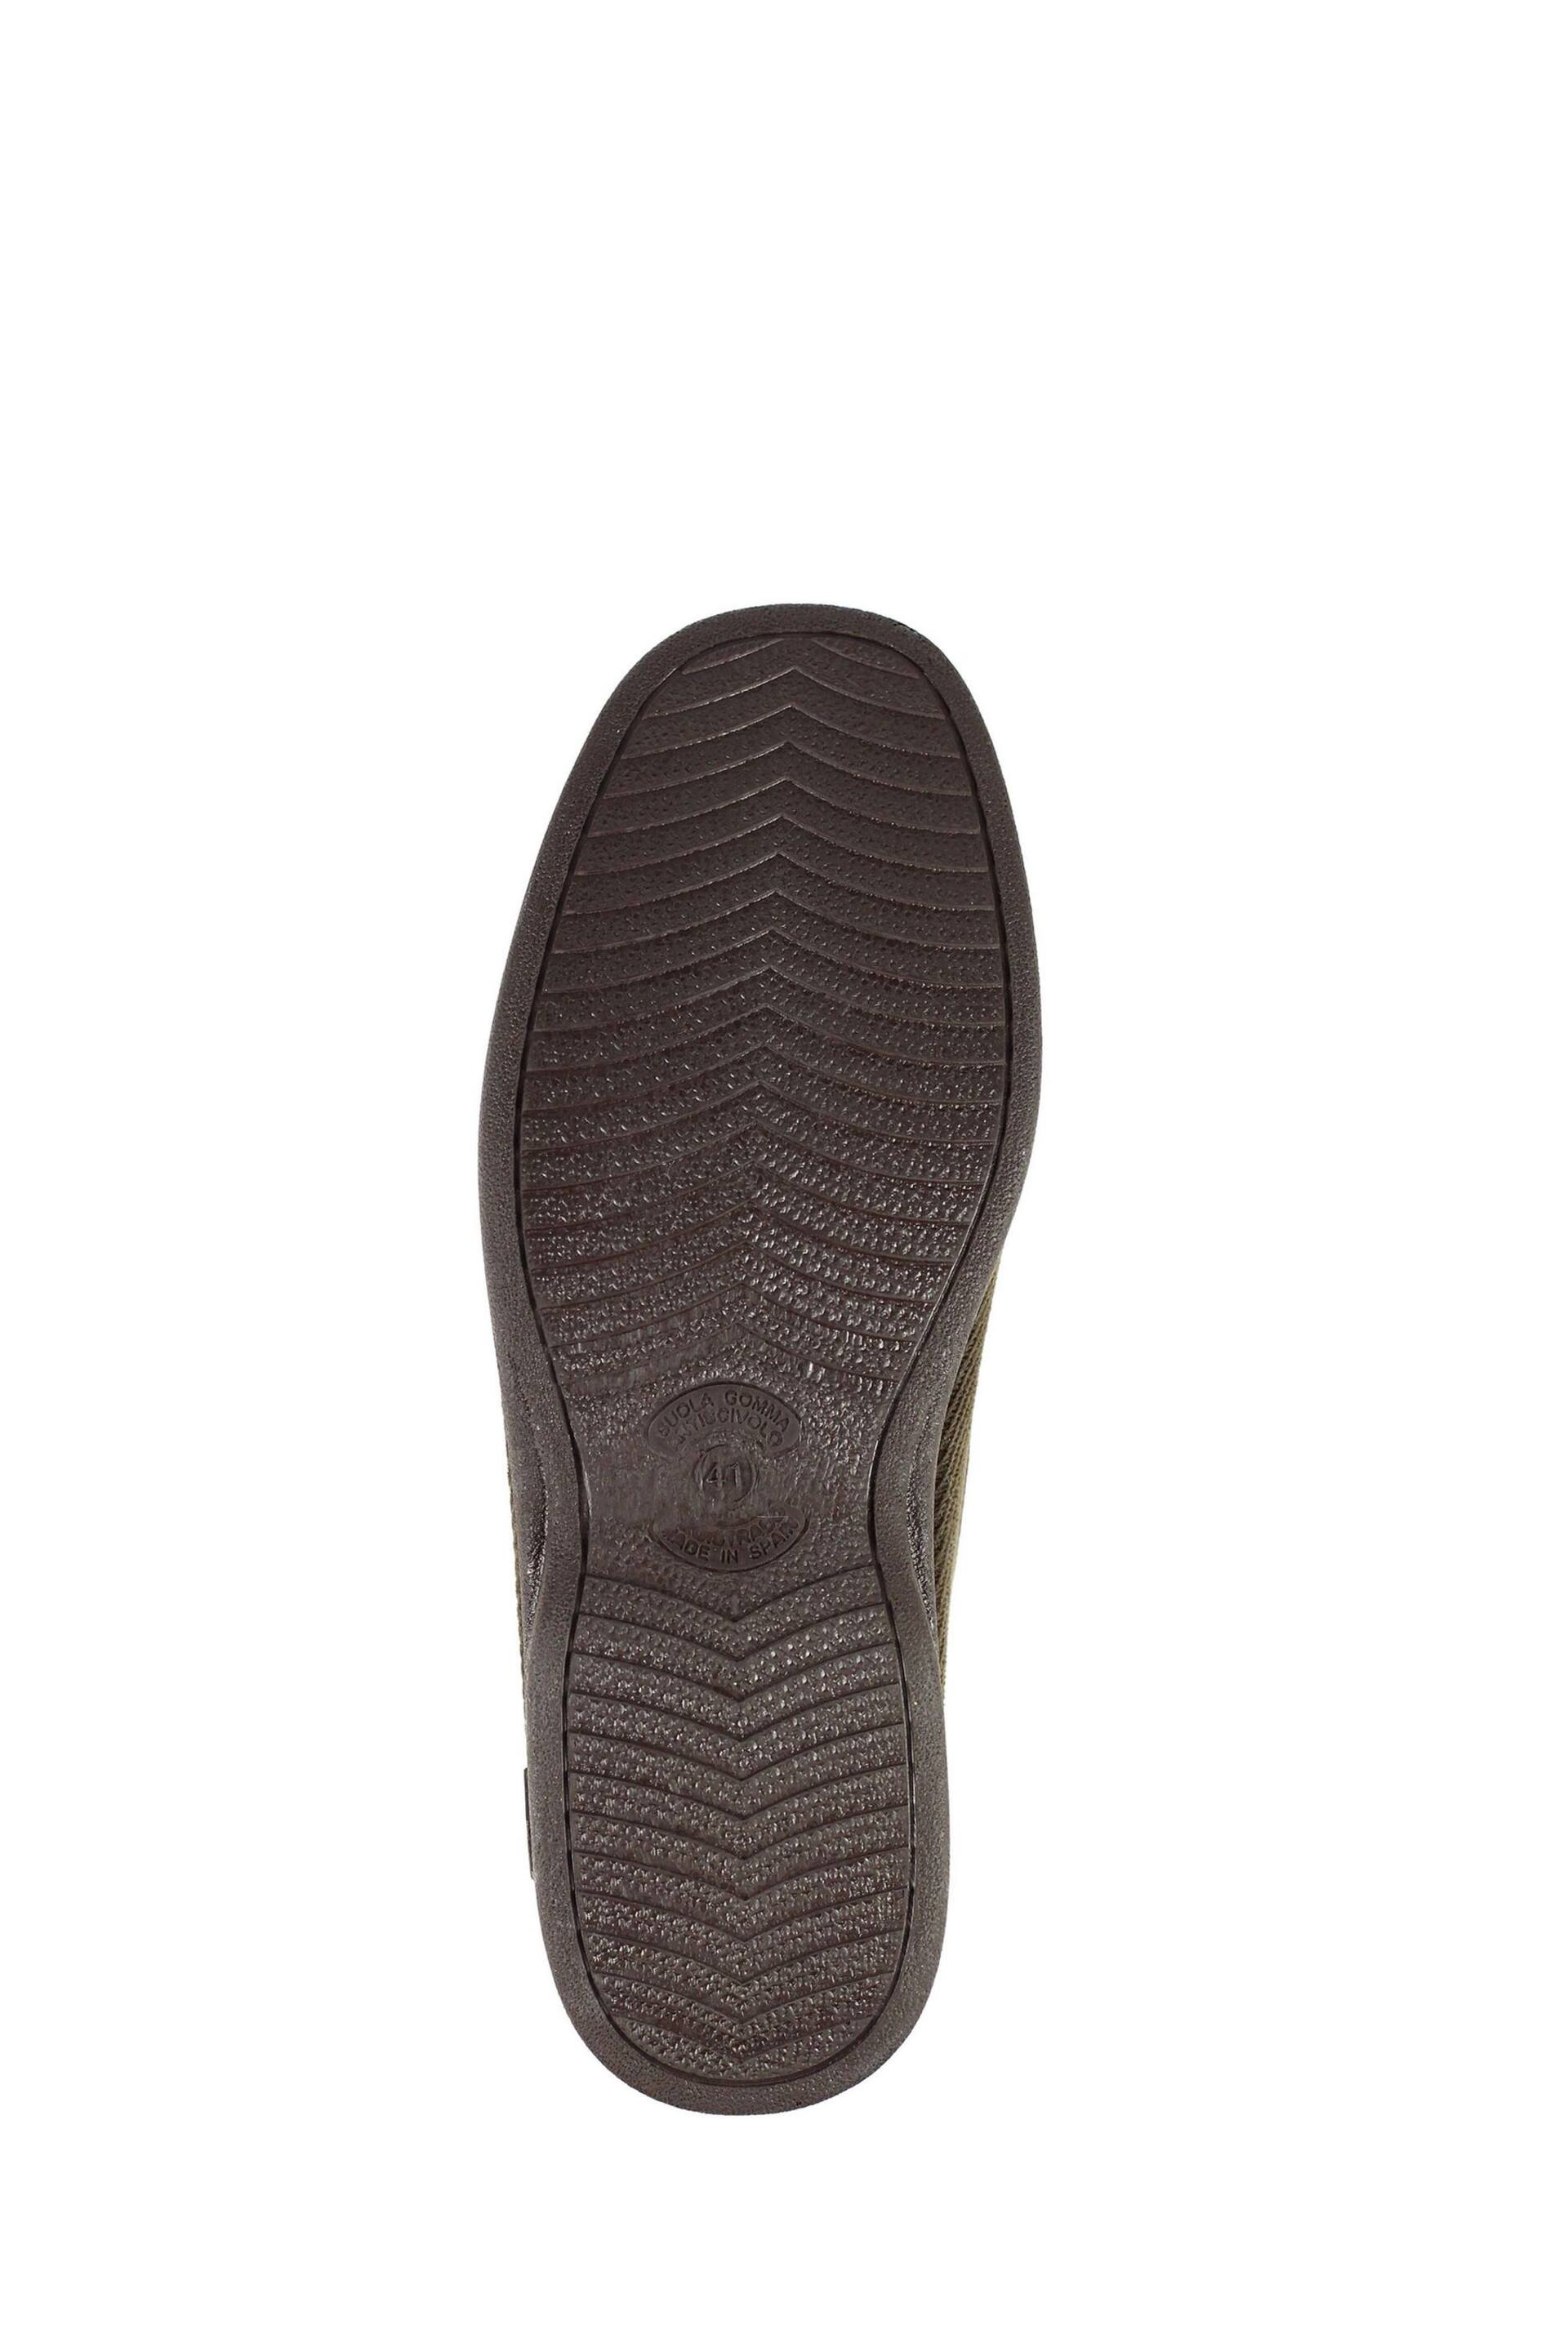 Goodyear Marshall Brown Full Brown Slippers - Image 6 of 9